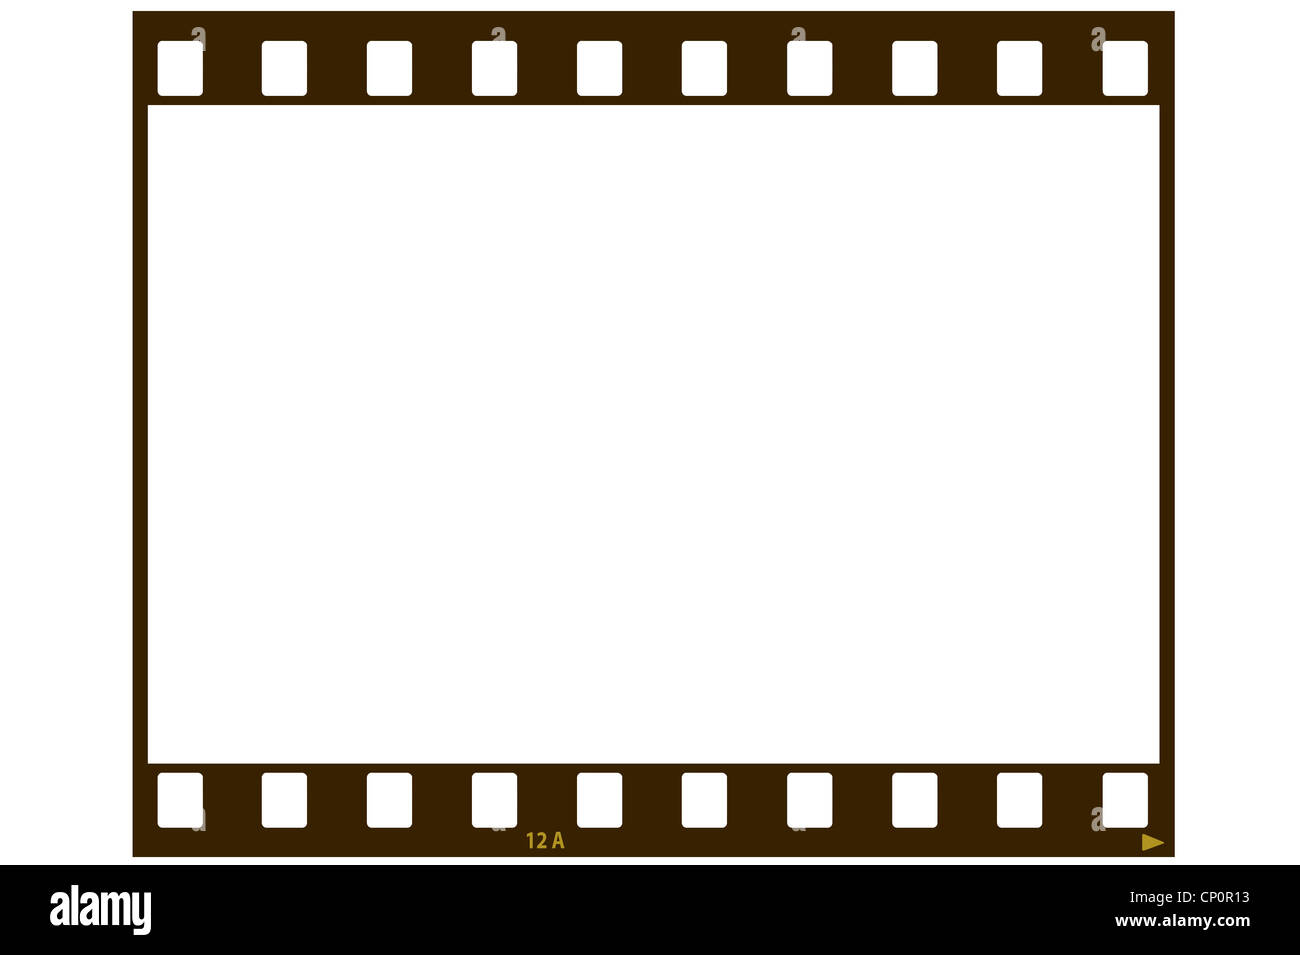 A blank 35 MM film strip for use as a design element. User may place any image or text inside the frame. Stock Photo